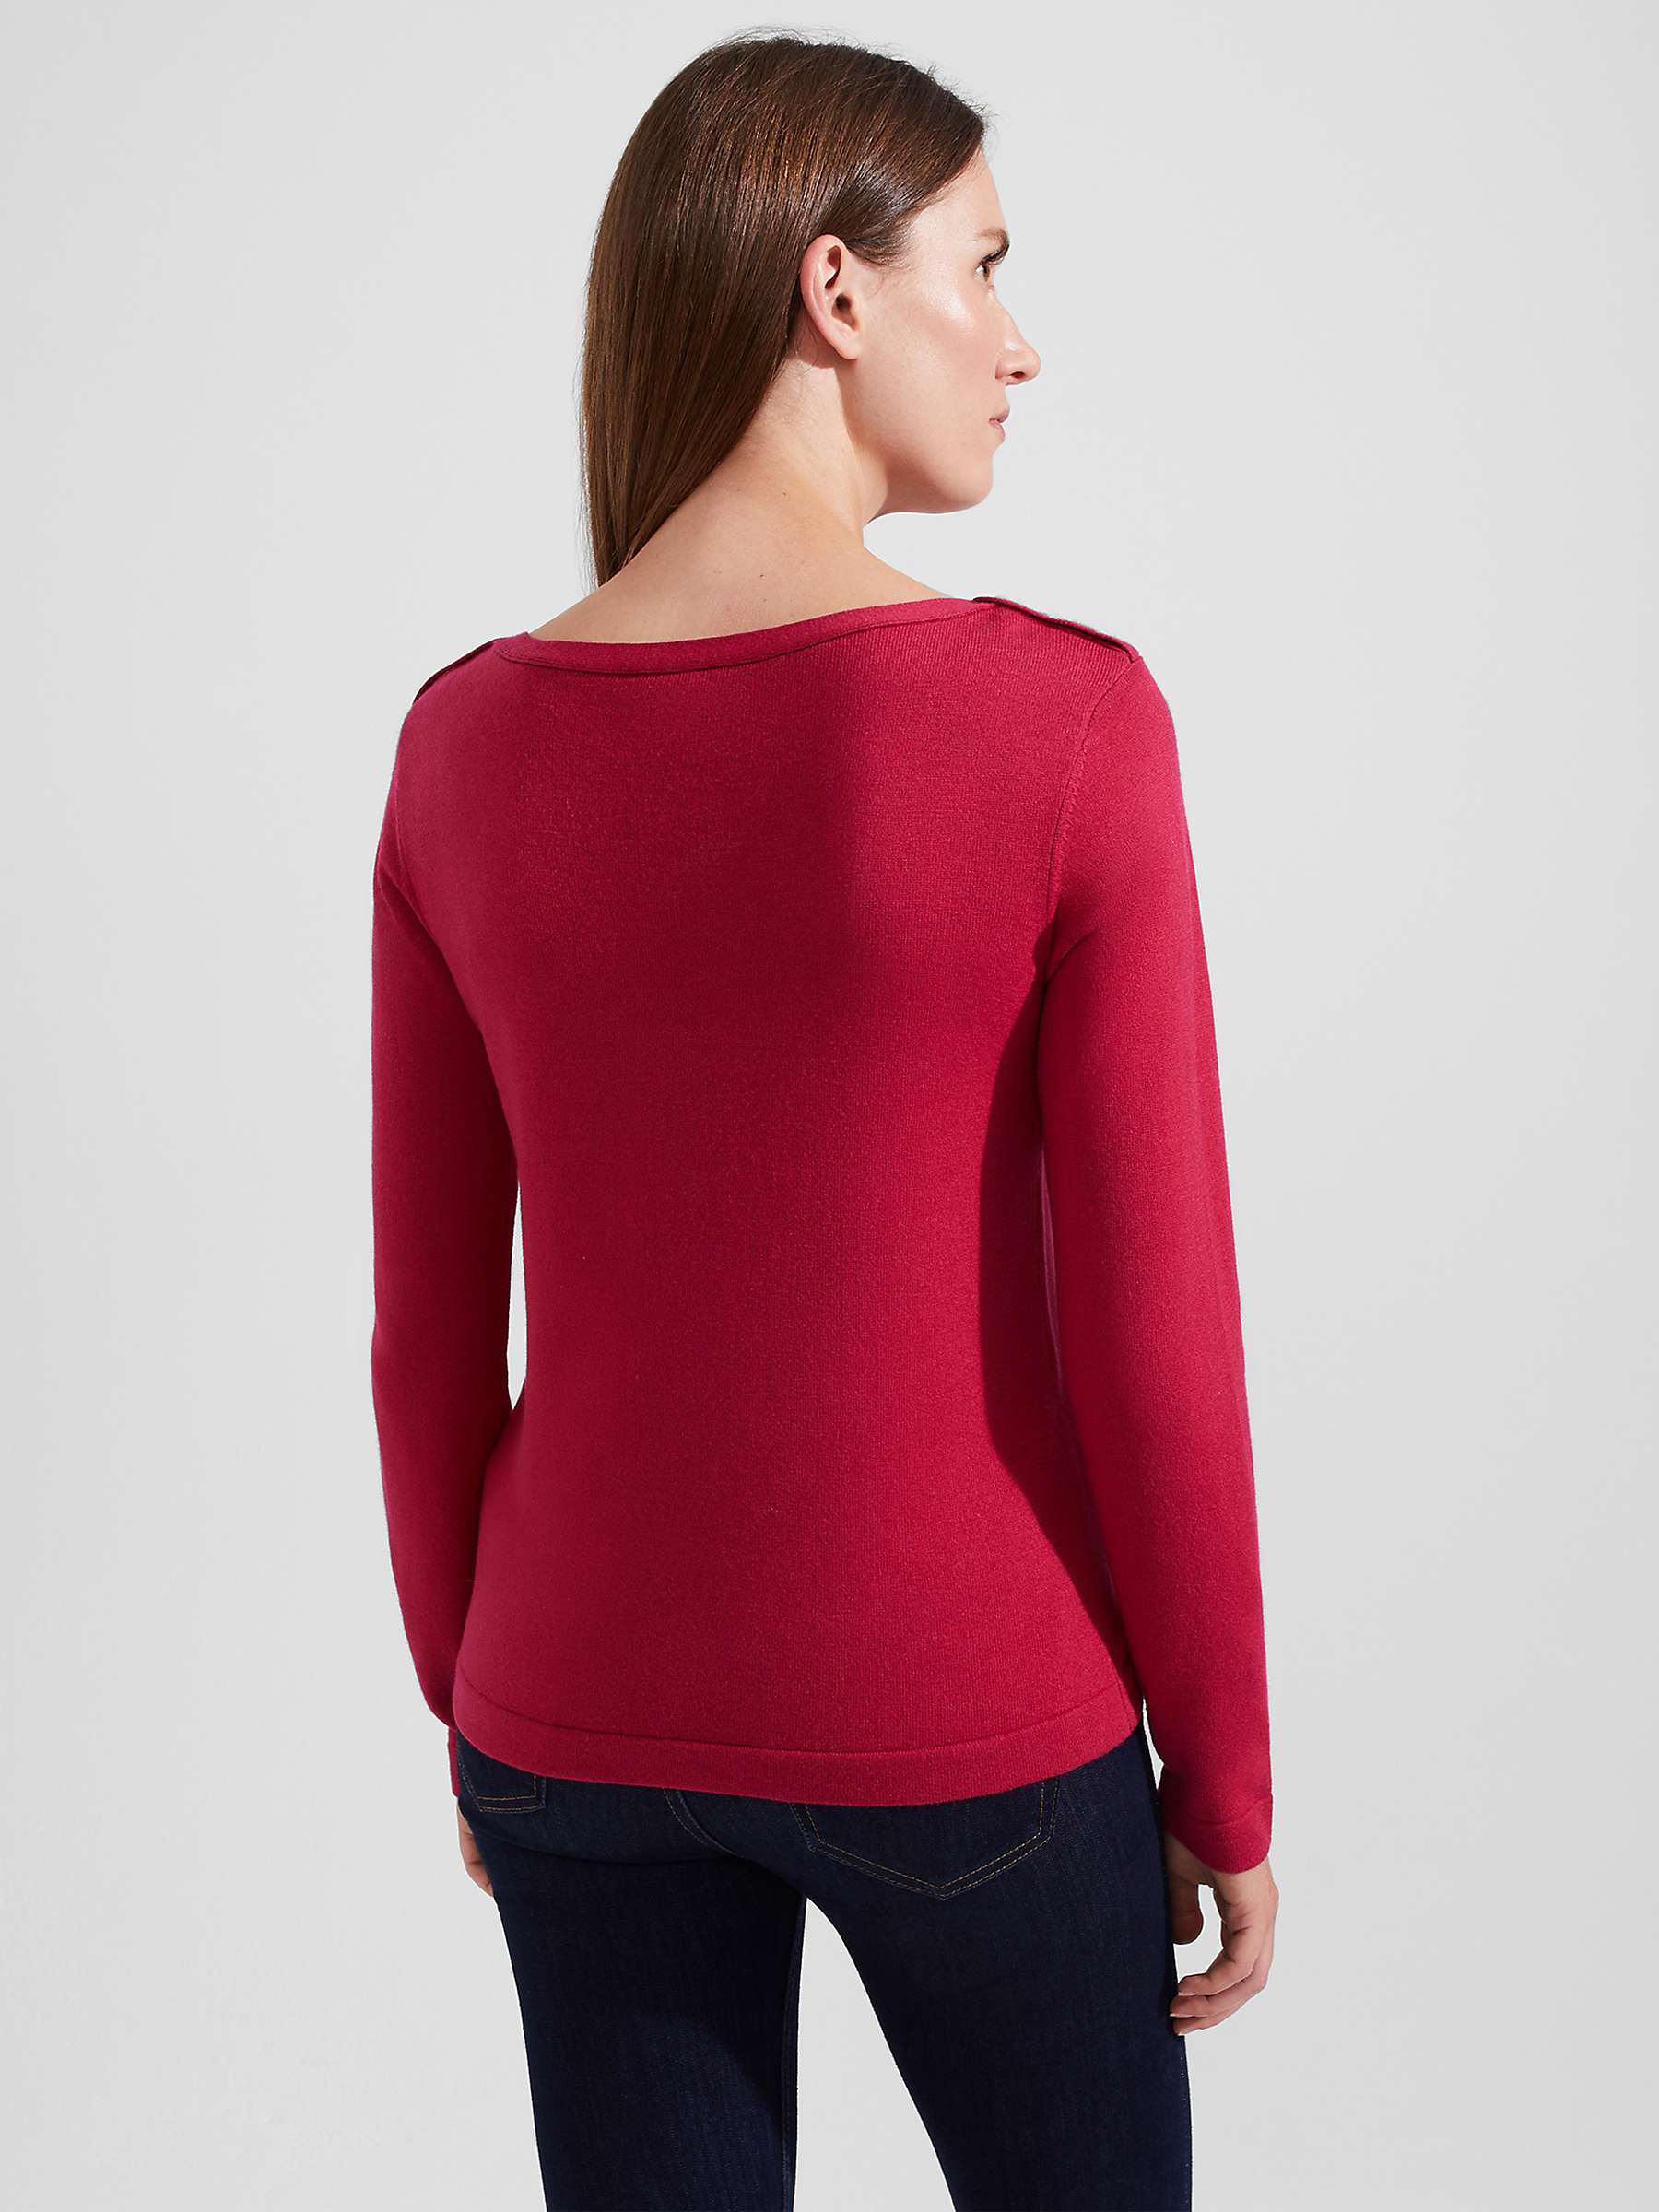 Buy Hobbs Petula Wool And Cashmere Blend Jumper Online at johnlewis.com